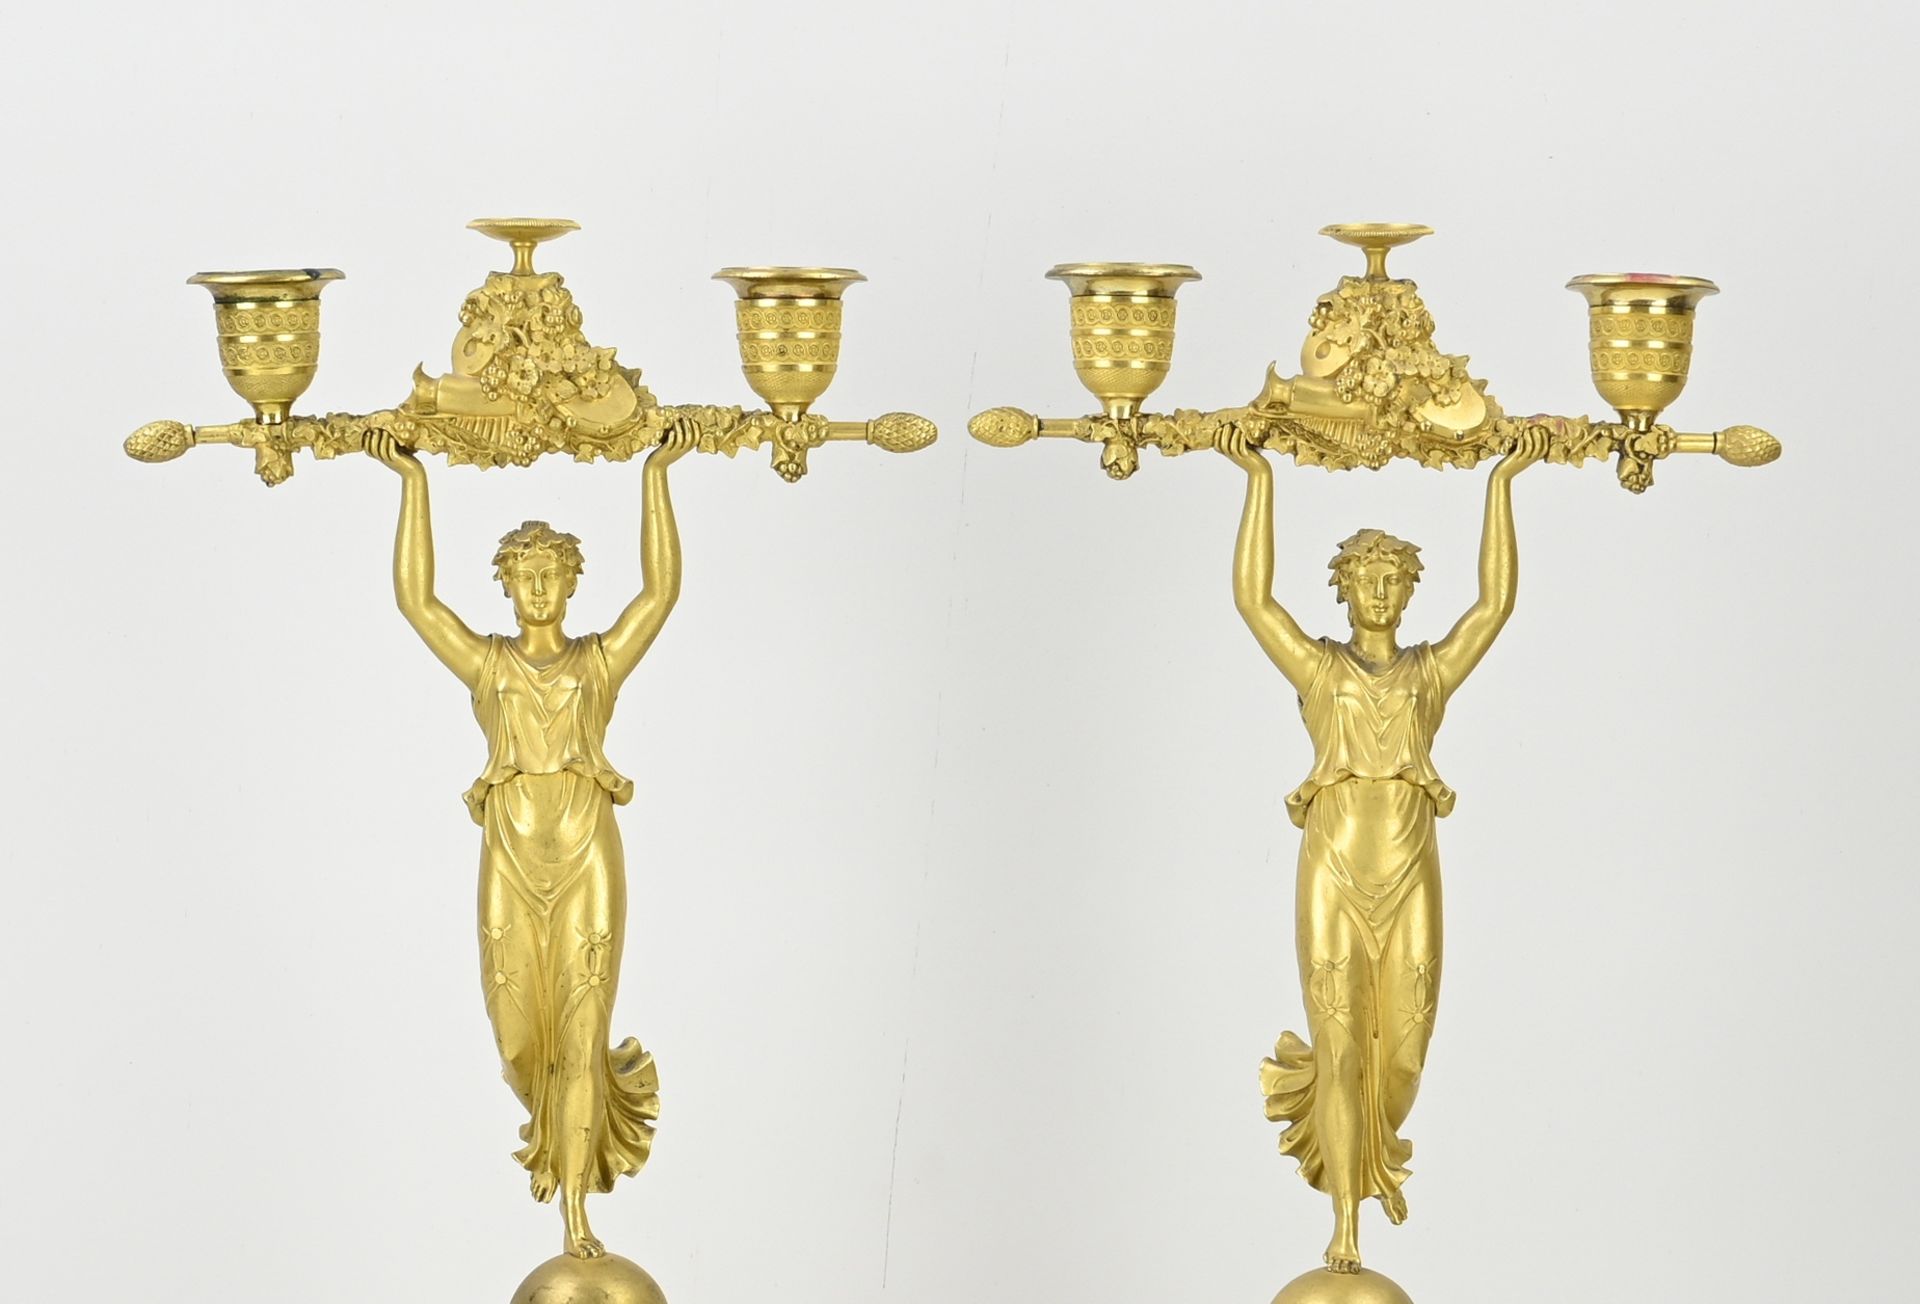 Two French Empire candlesticks, H 49 cm. - Image 3 of 3